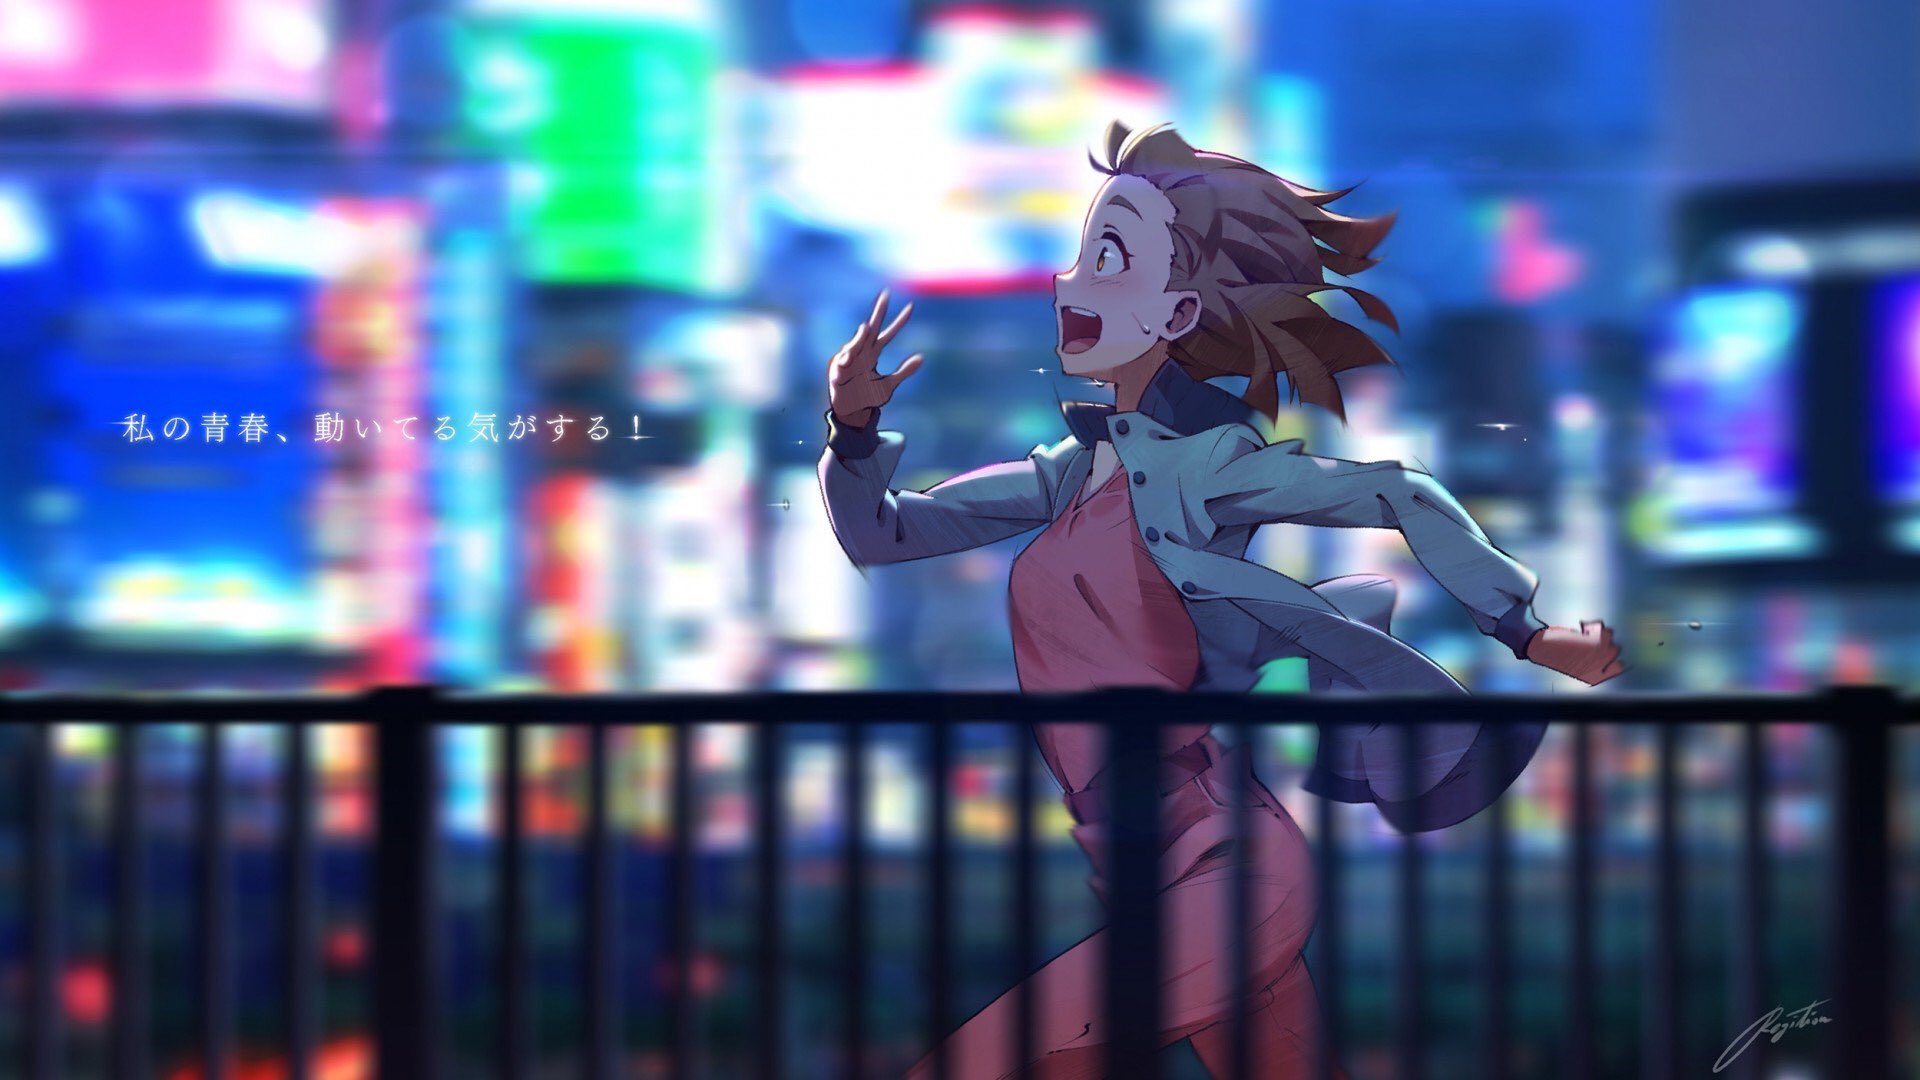 A Place Further Than The Universe 素晴らしい 壁紙 Yorimoi よりもい Credits To The Artist T Co Yzkynjzbdb Twitter